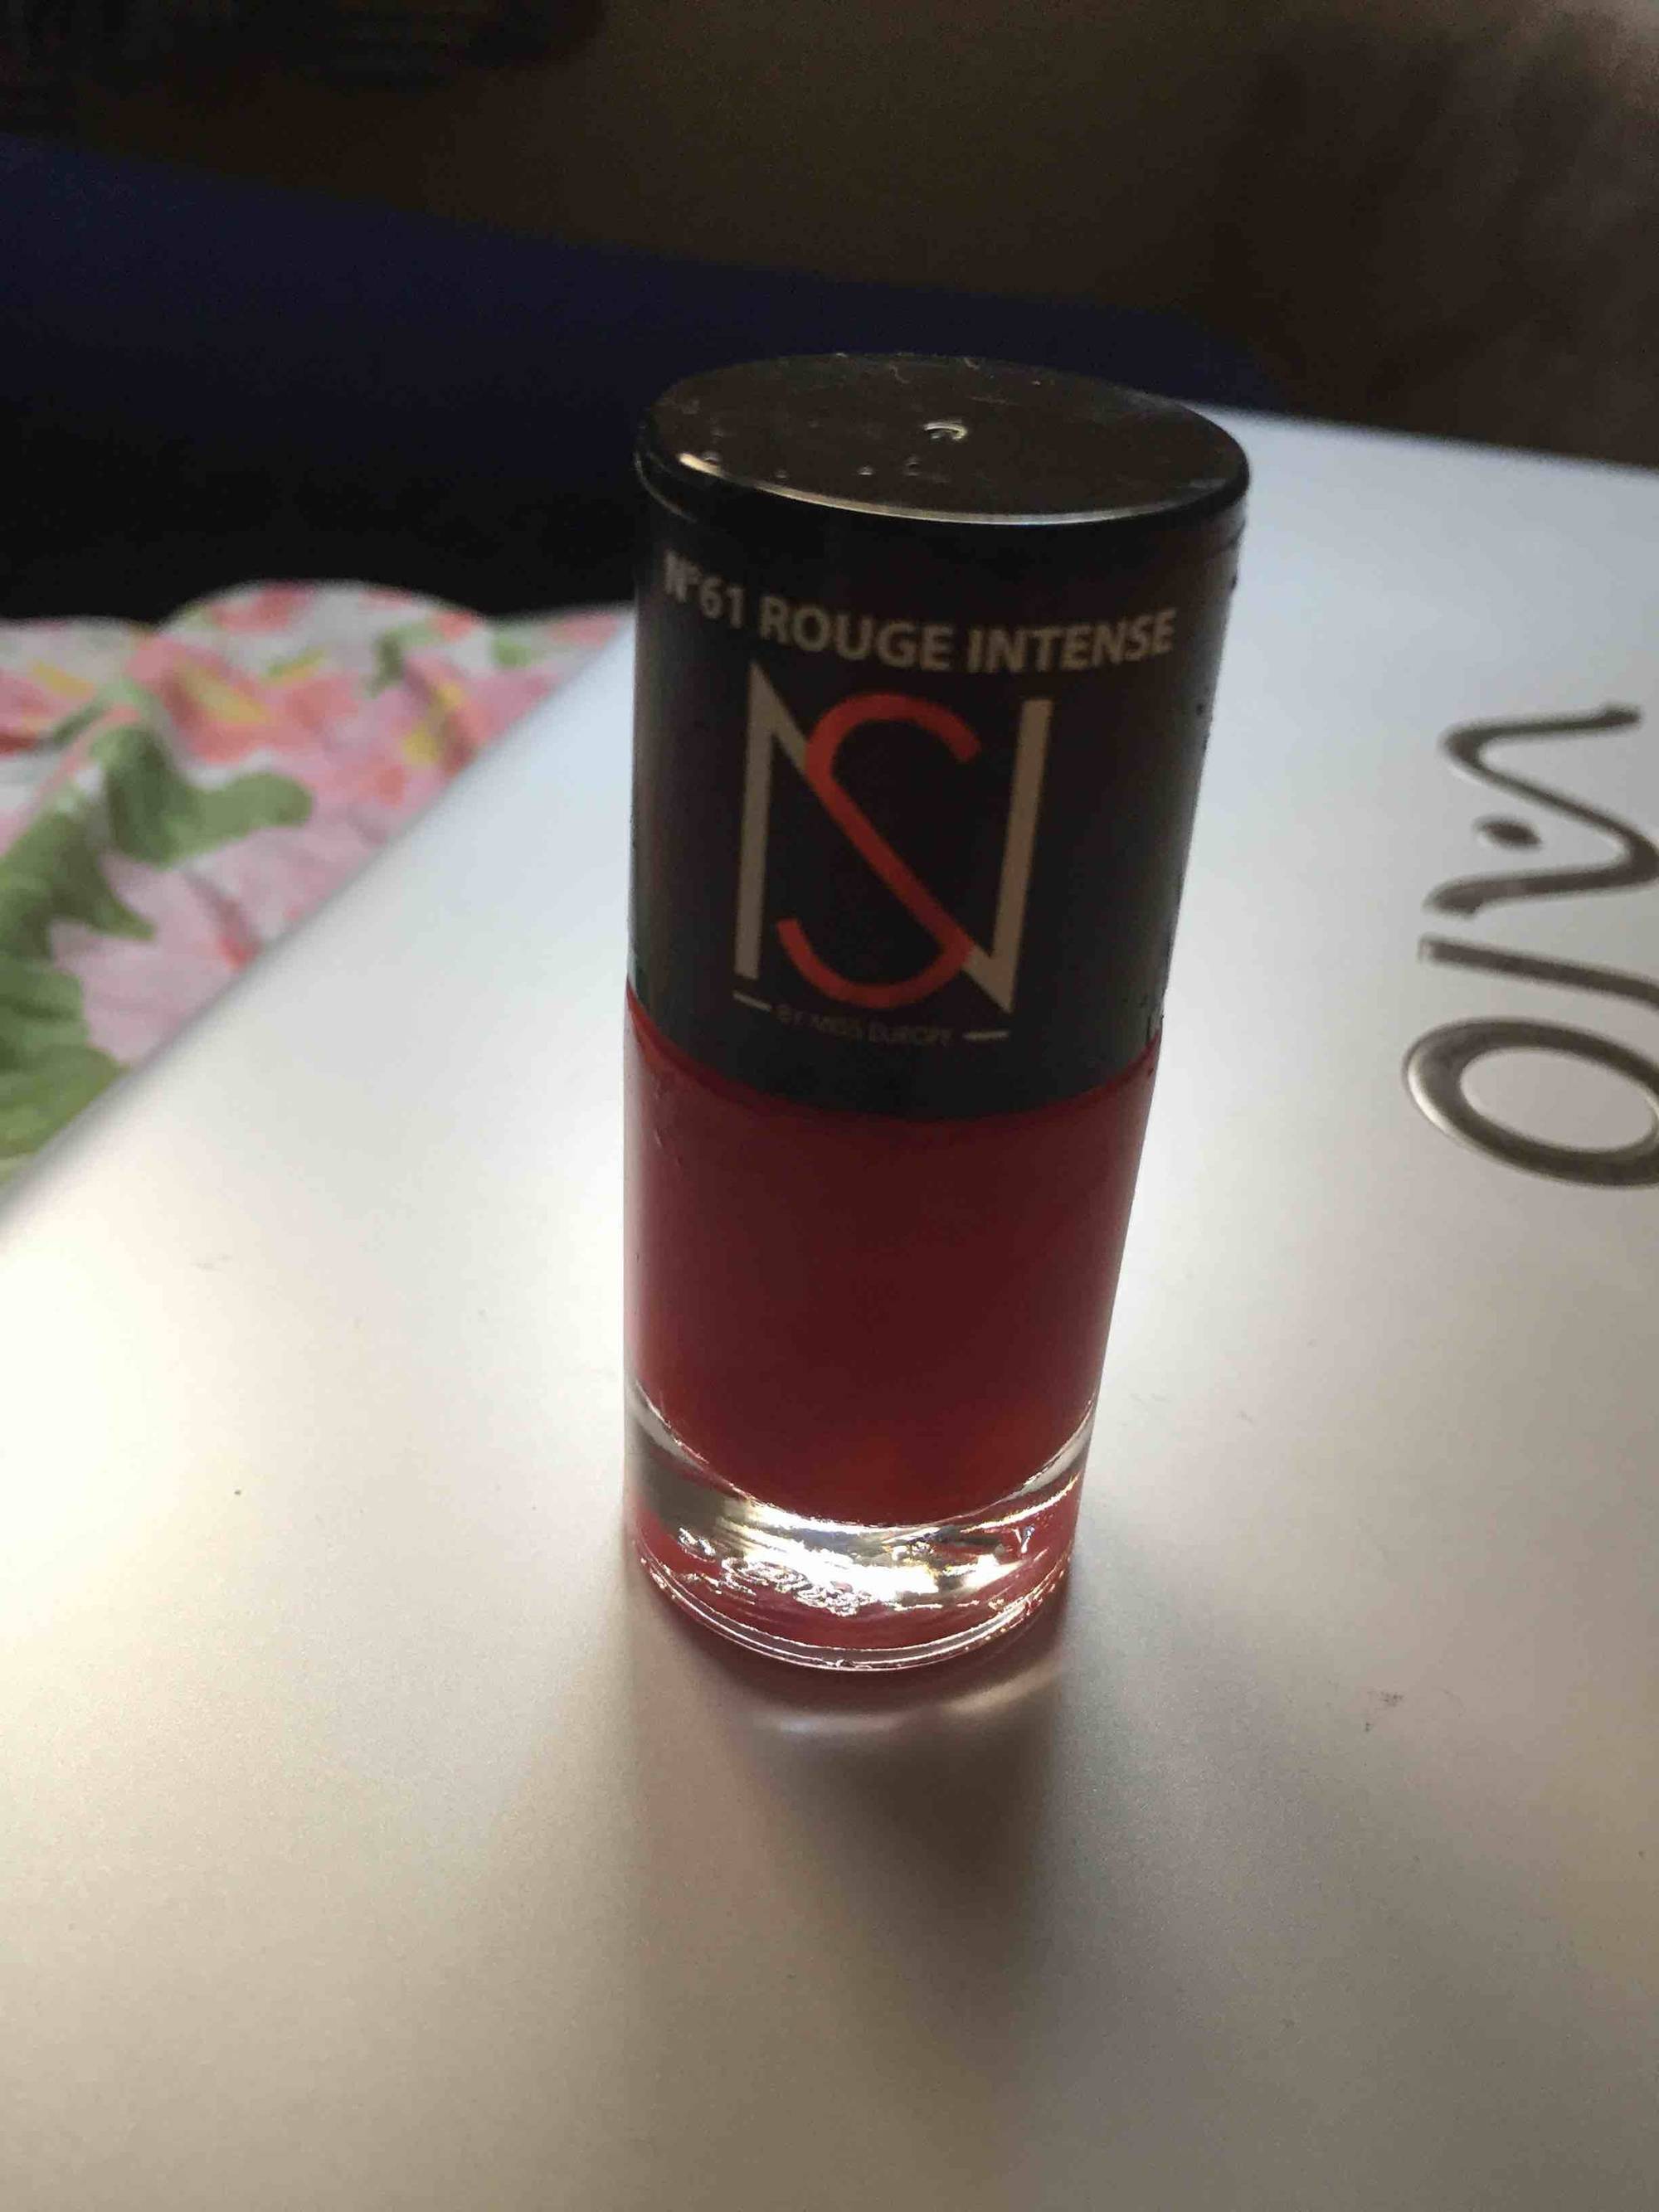 NS BY MISS EUROPE - N°61 rouge intense - Vernis à ongles